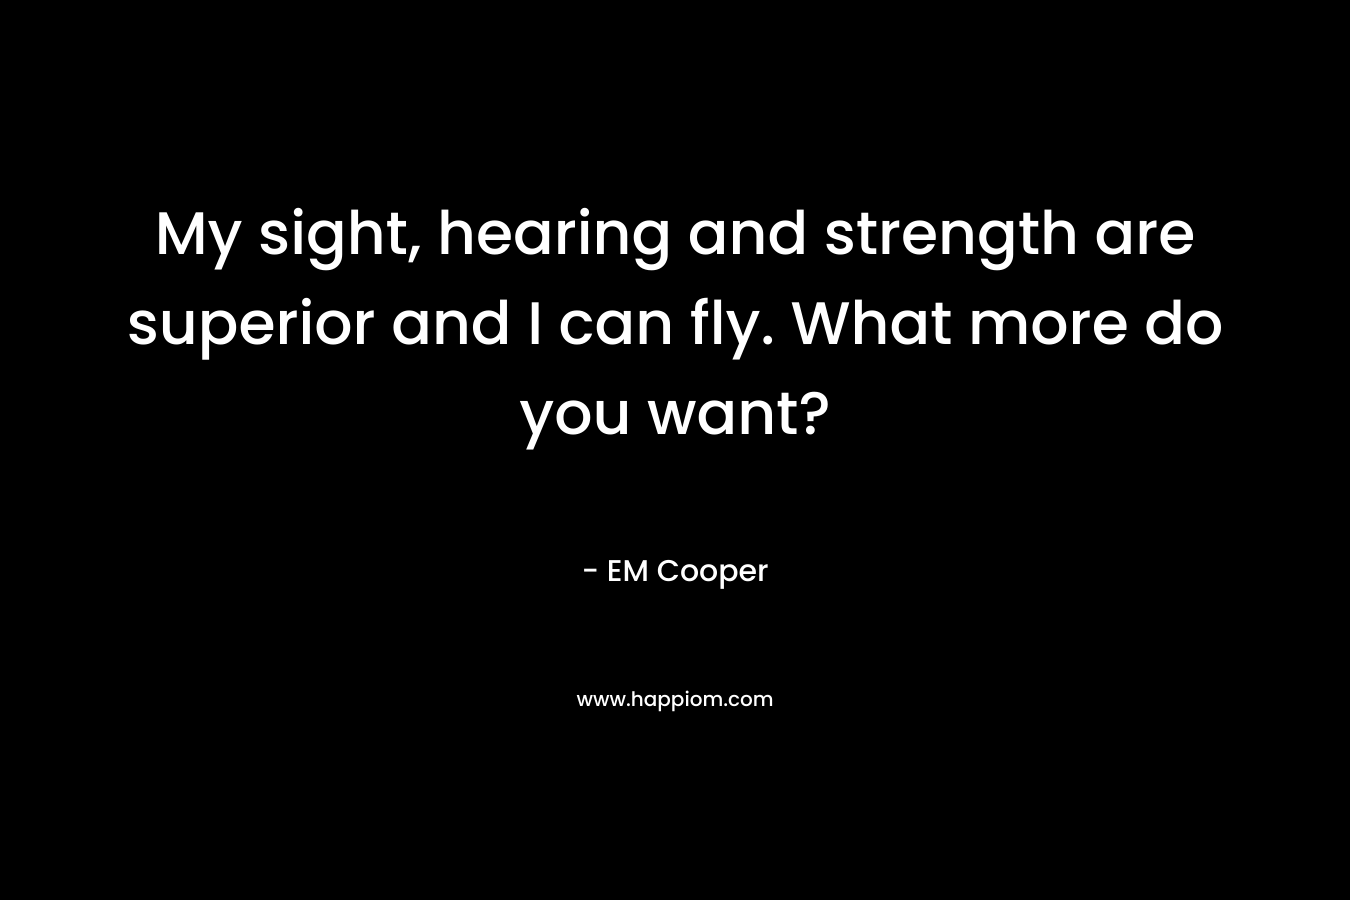 My sight, hearing and strength are superior and I can fly. What more do you want? – EM Cooper